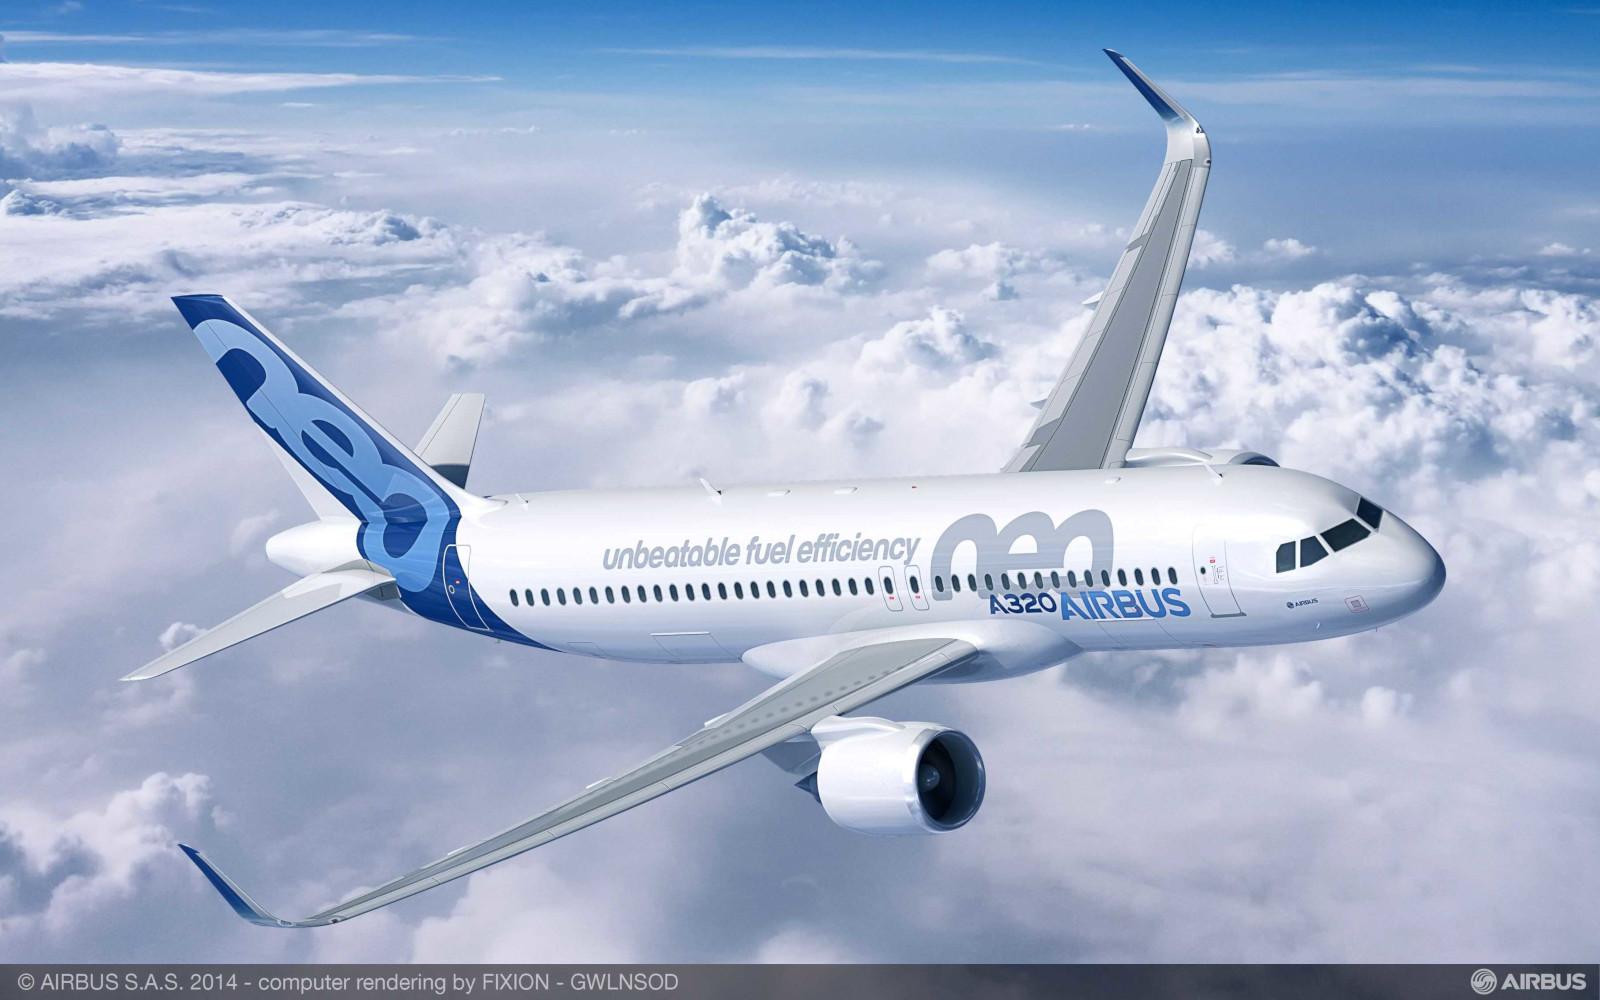 FL Technics Indonesia Gains Certification For Airbus A320neo MRO